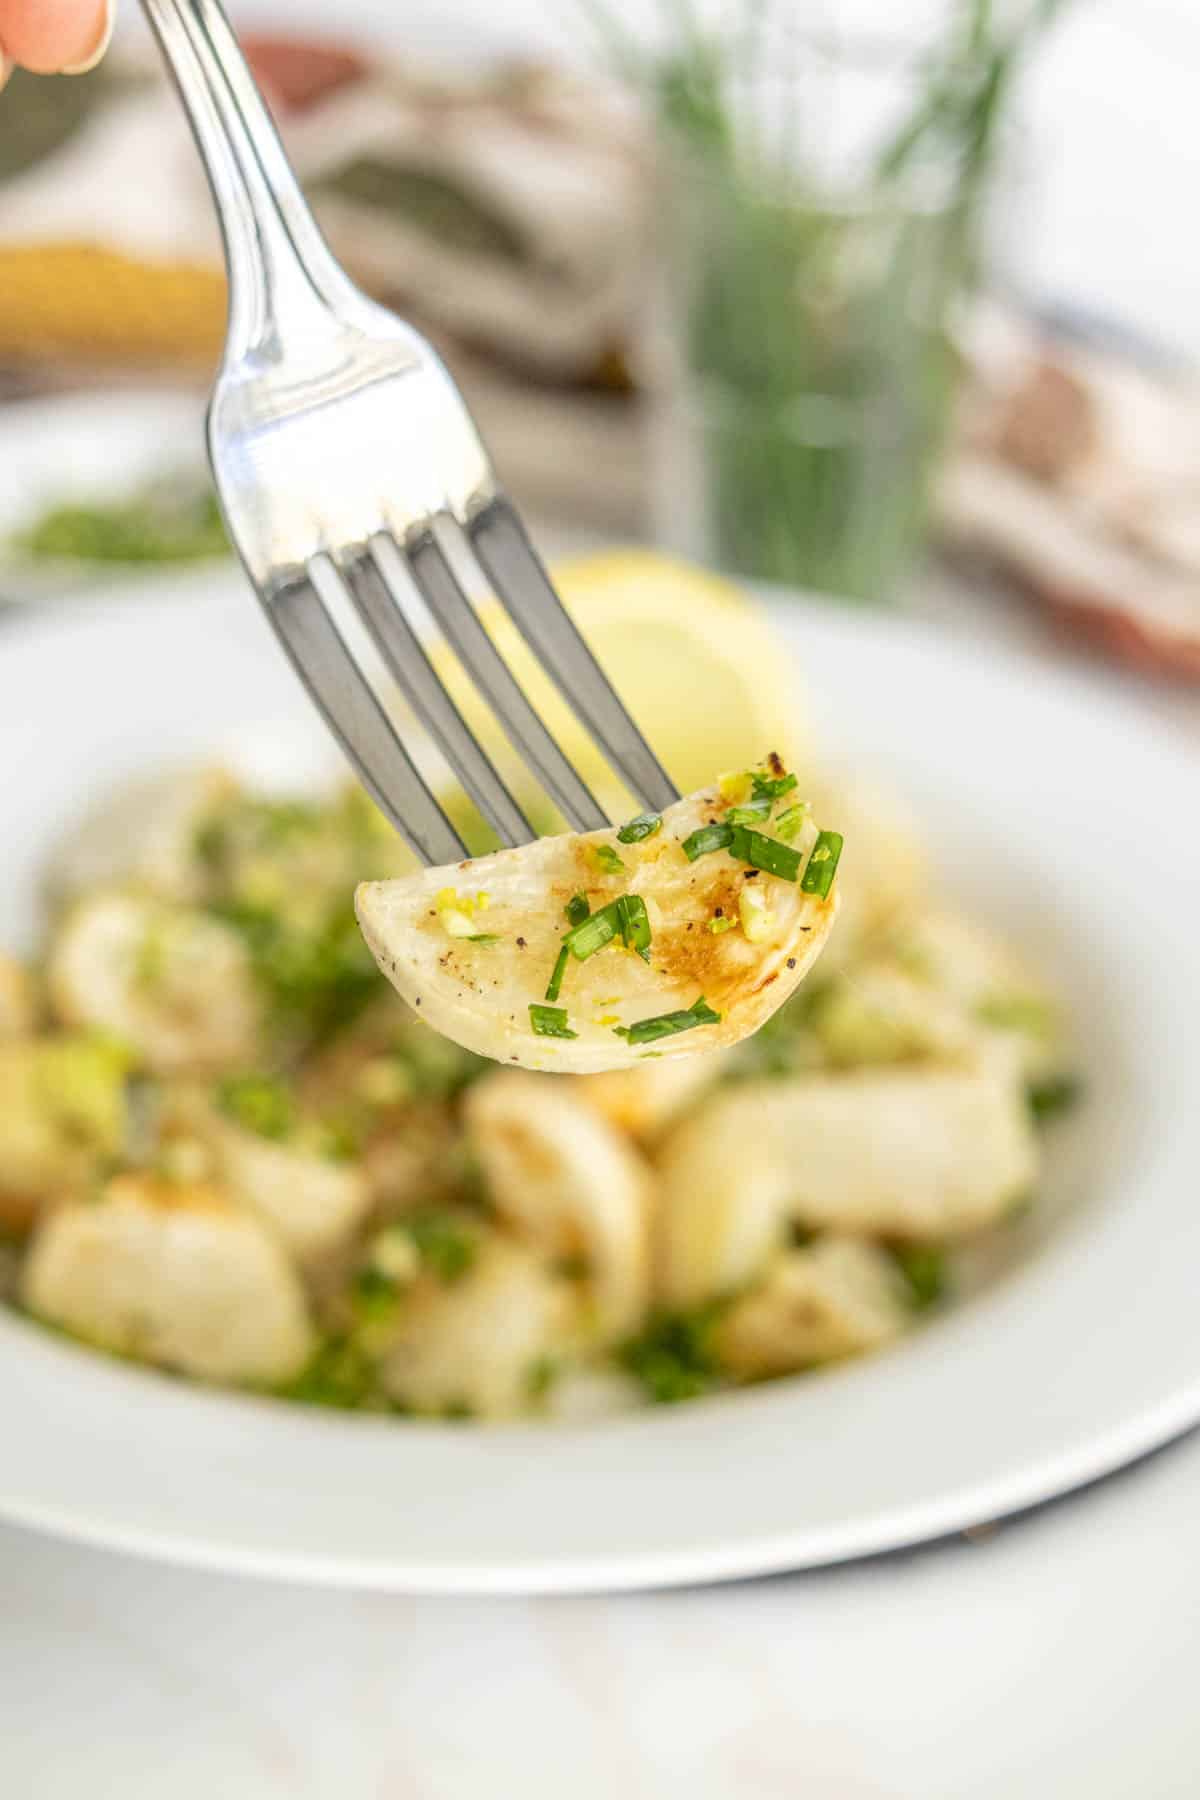 A fork holds a piece of seasoned potato gnocchi above a white plate filled with the dish. The gnocchi is garnished with chopped herbs.